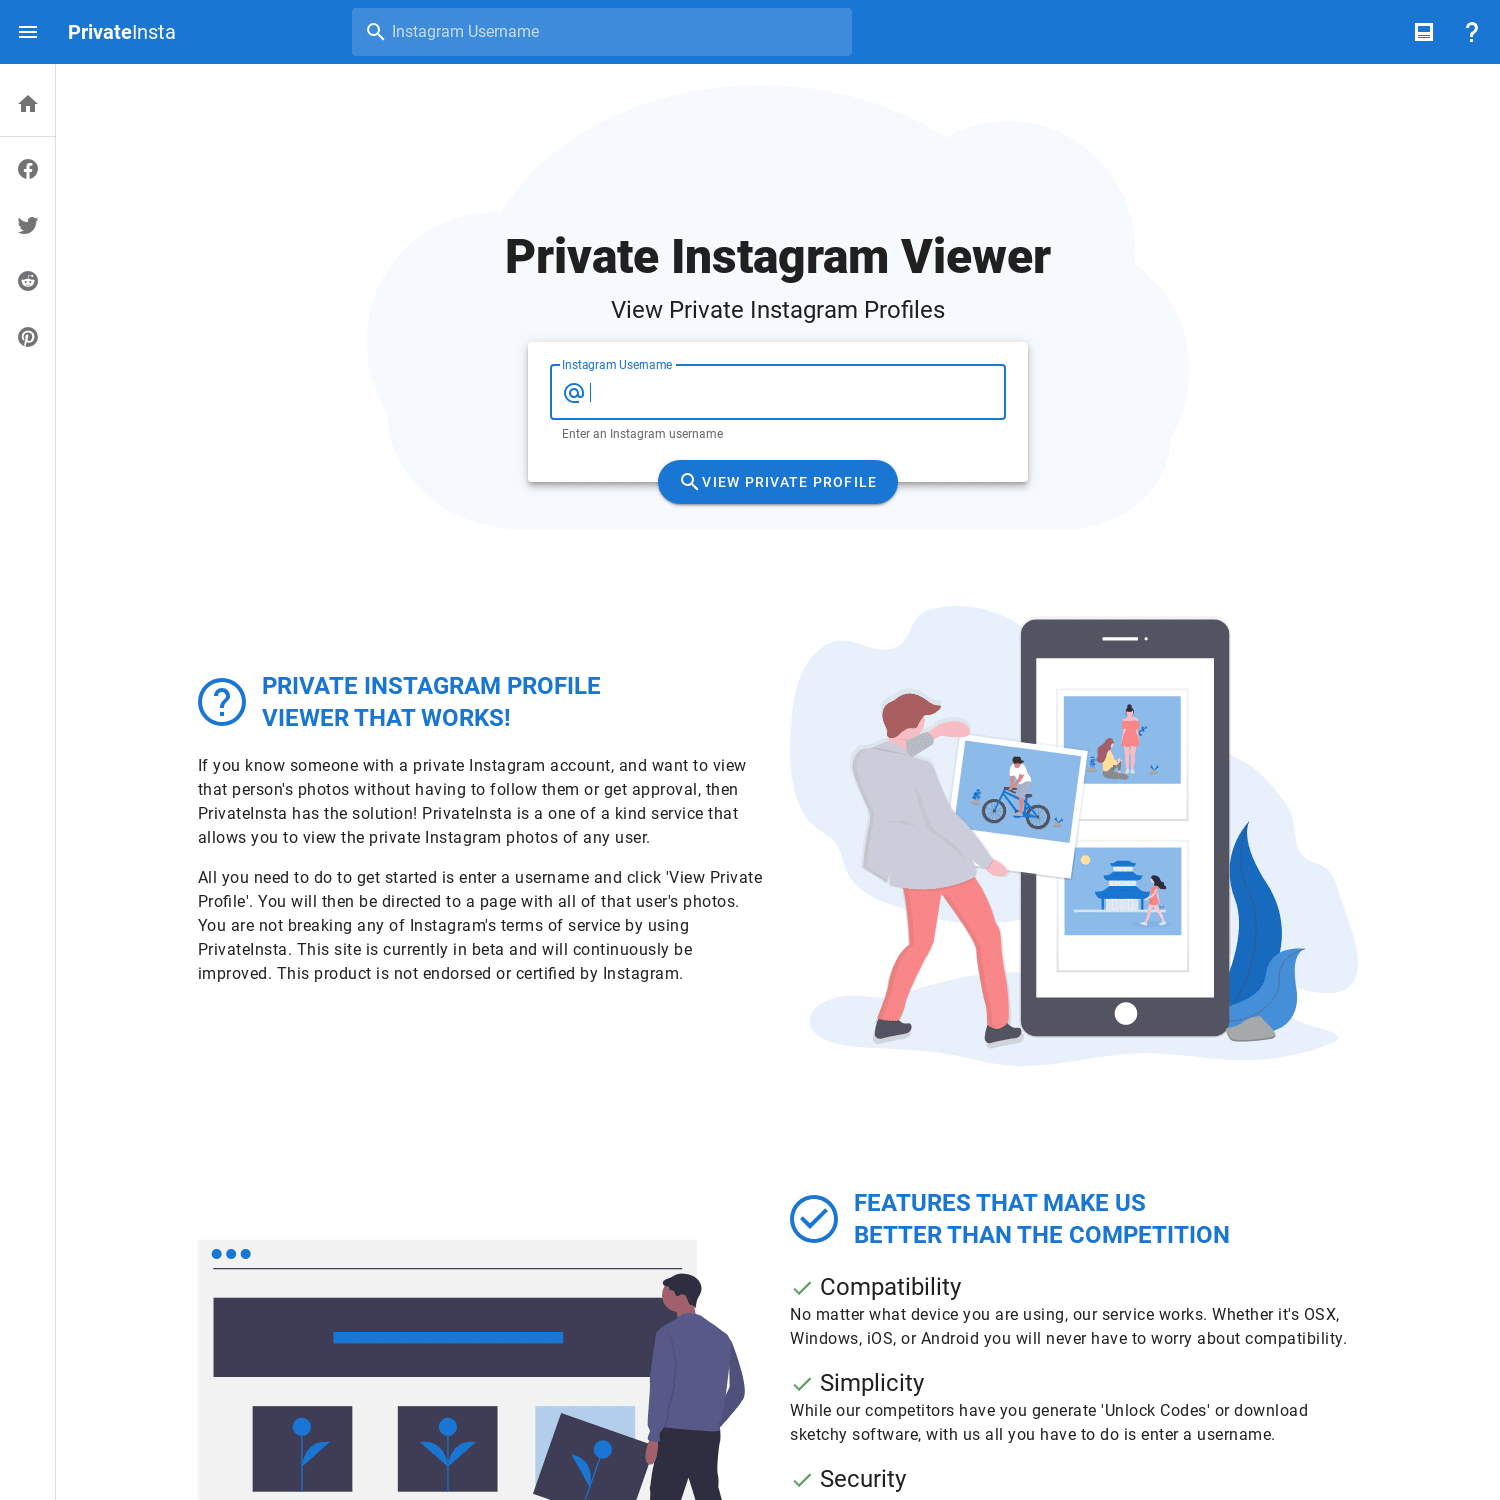 Private Instagram Viewer | How To View Private Instagram Profiles